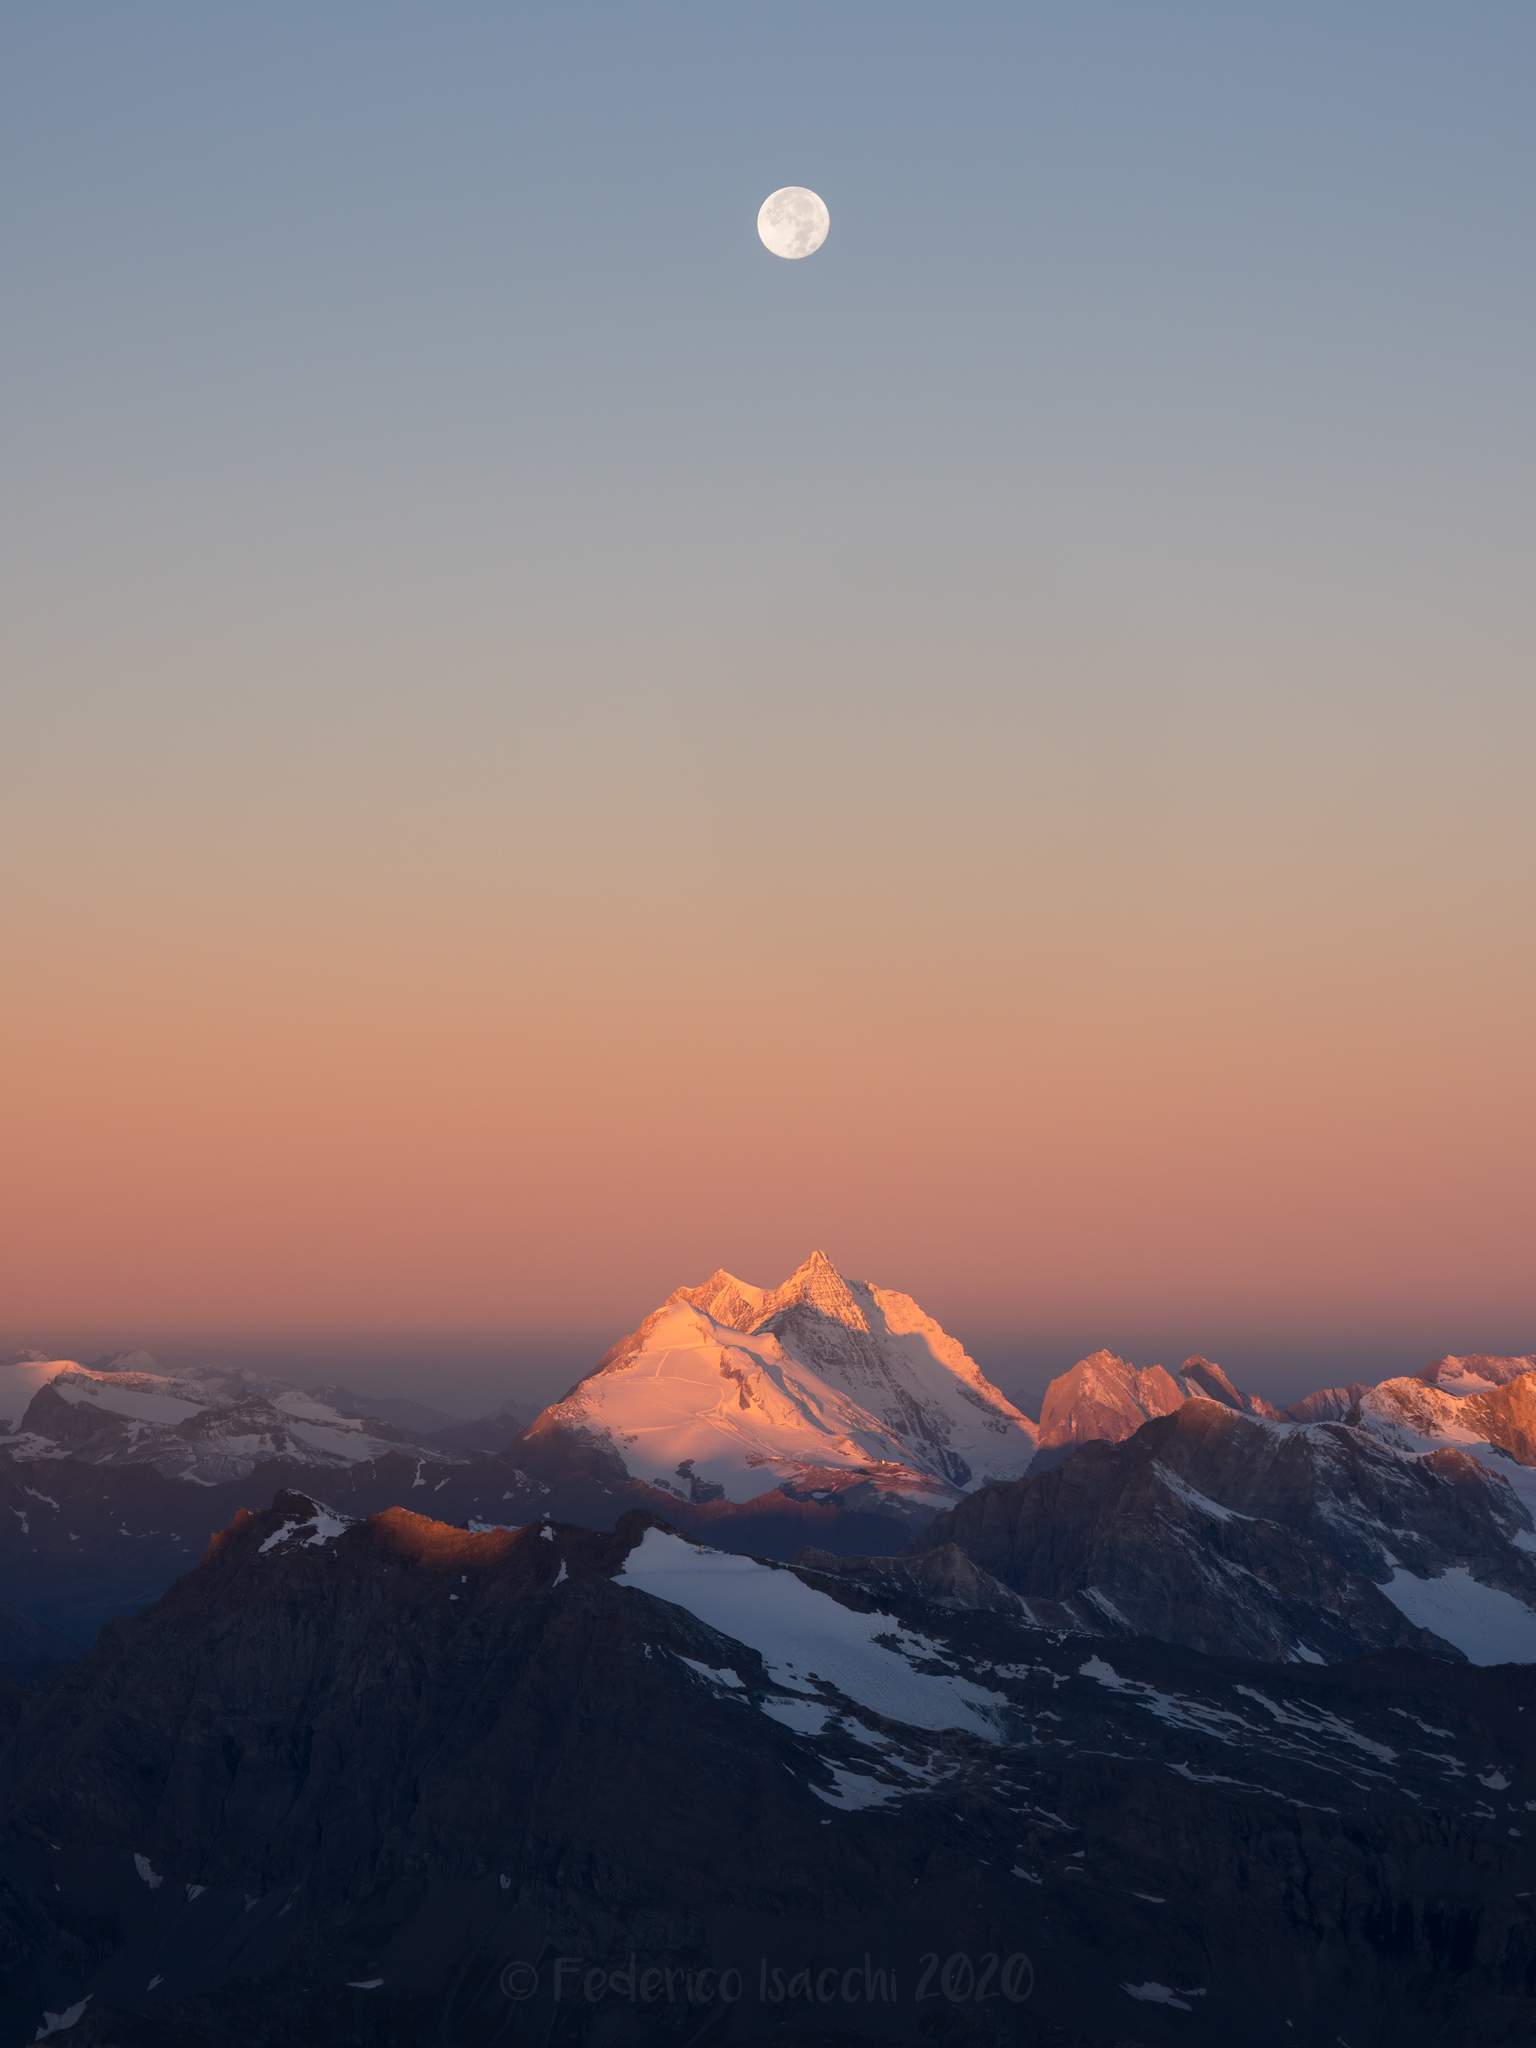 The Moon and the Graie Alps...